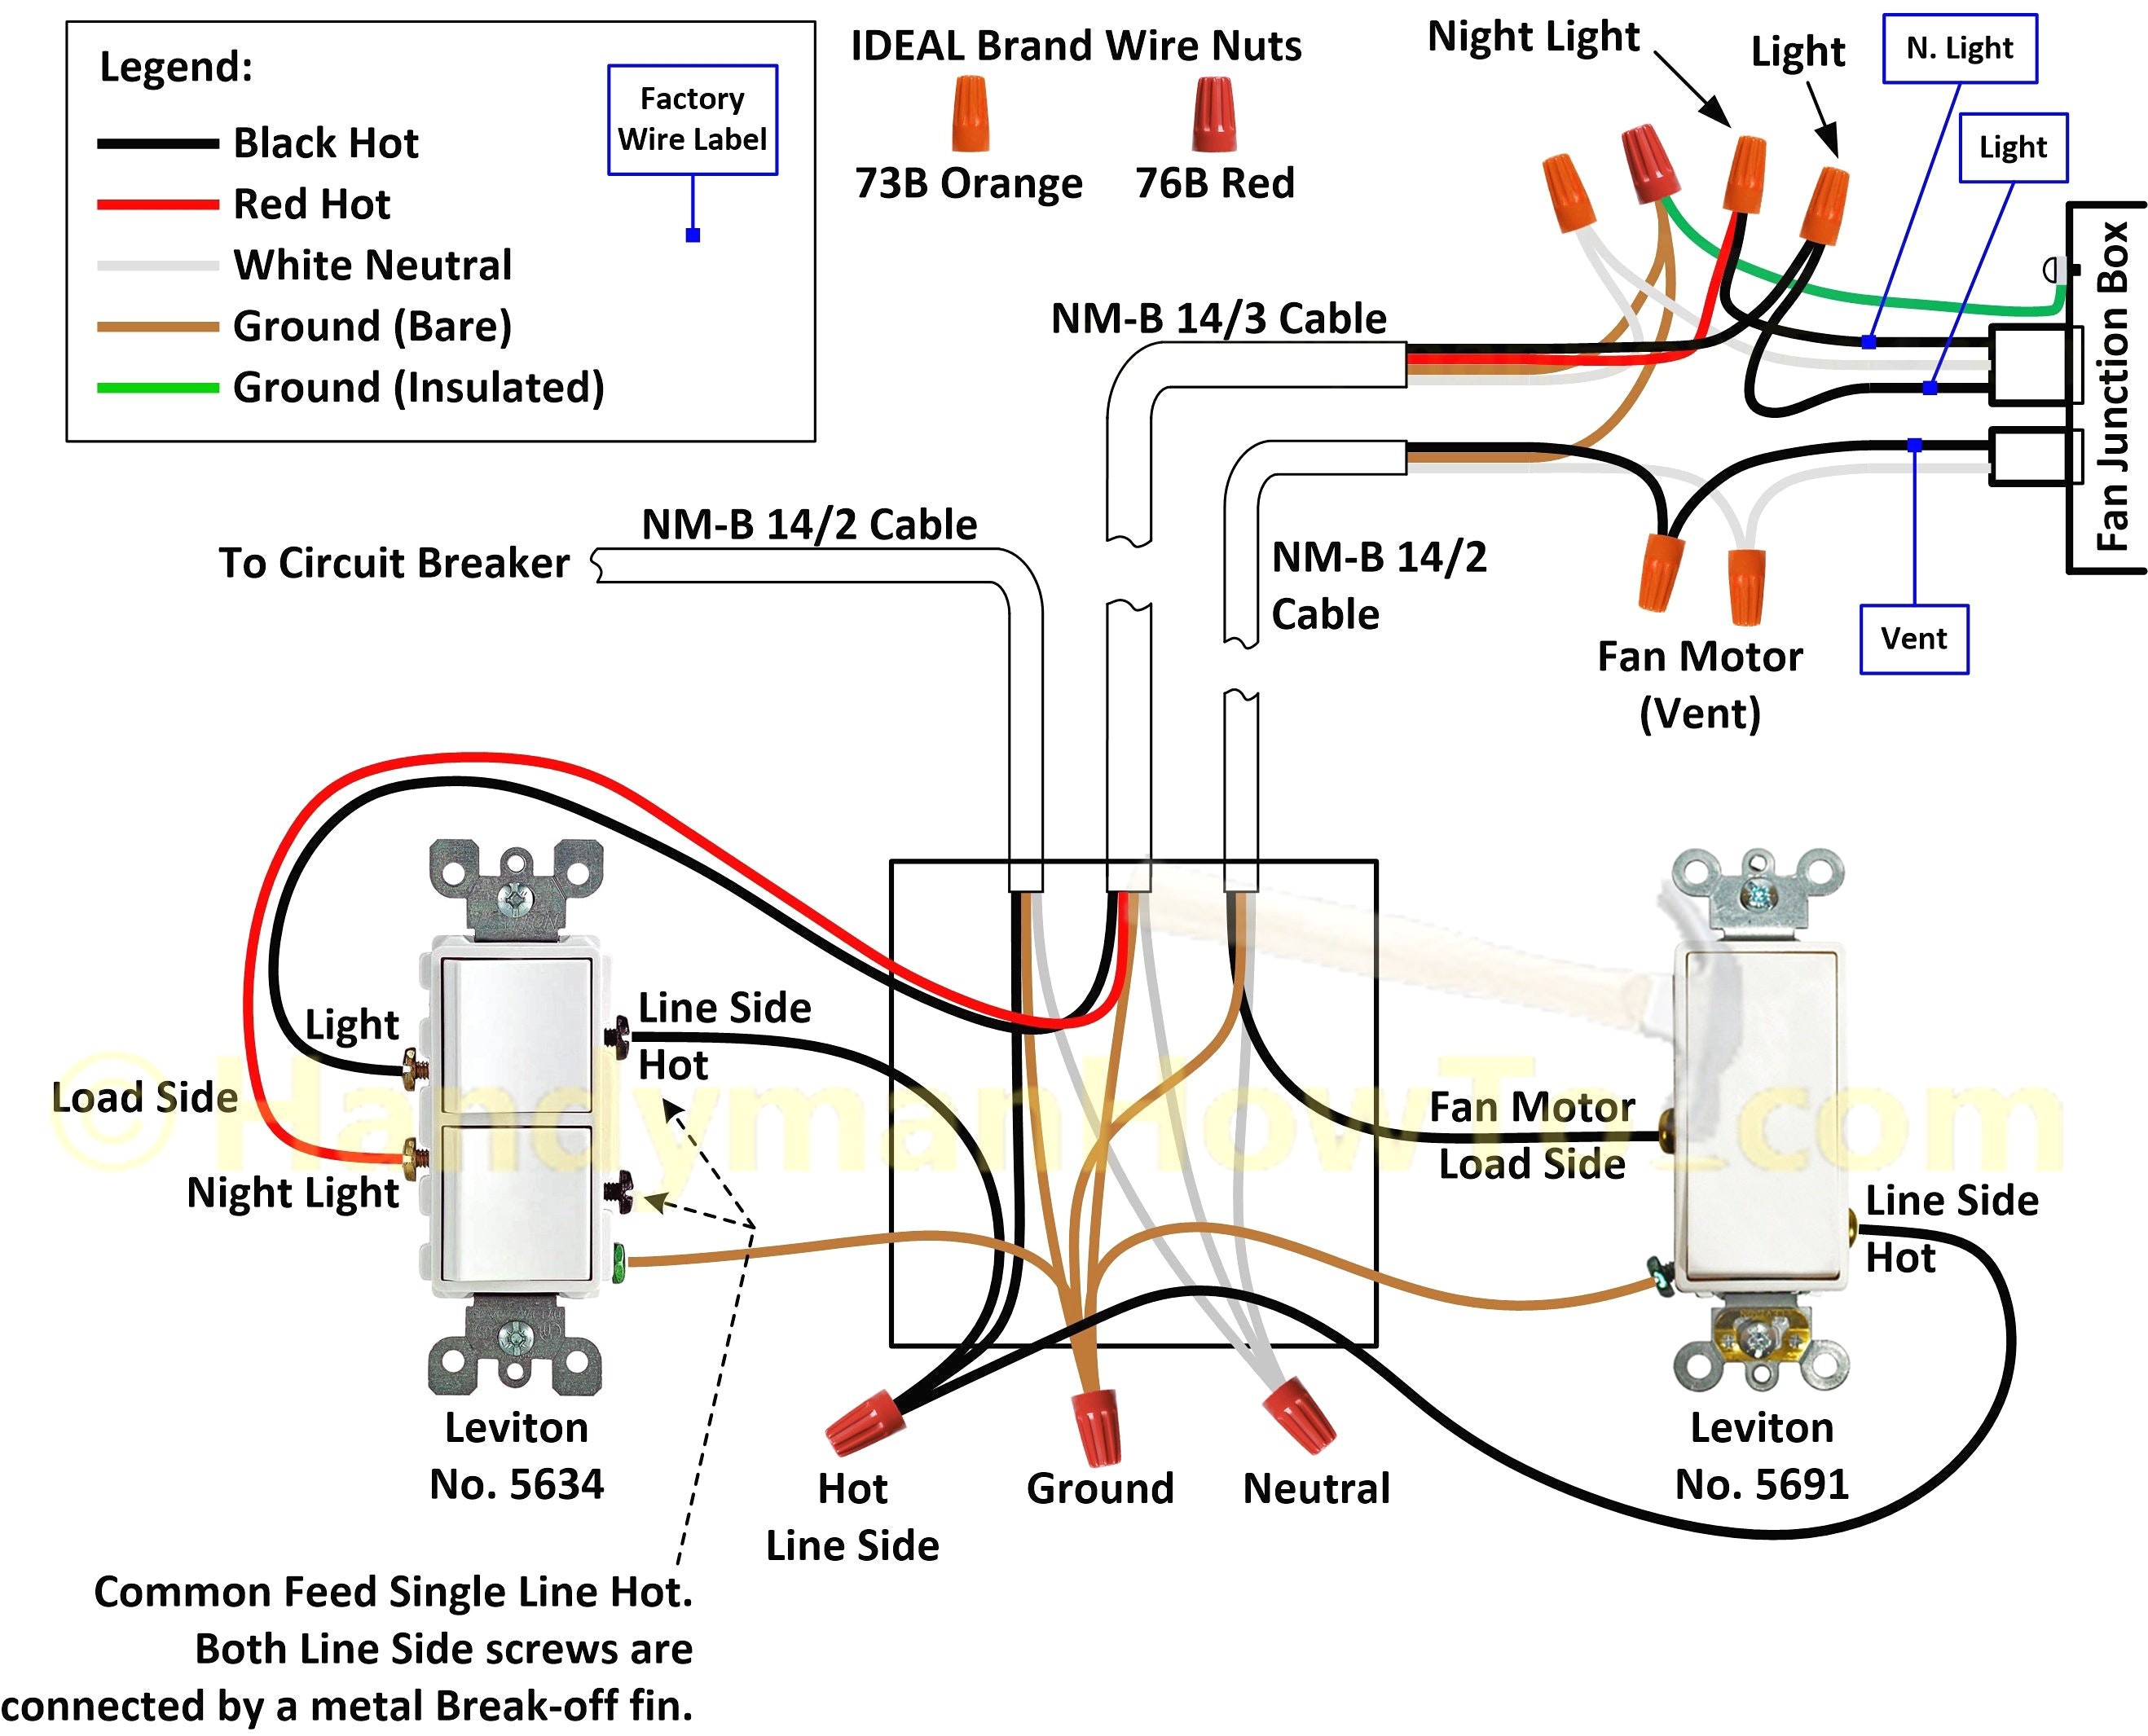 Wiring Diagram Multiple Lights e Switch New Ceiling Fan with Light Wiring Diagram E Switch In